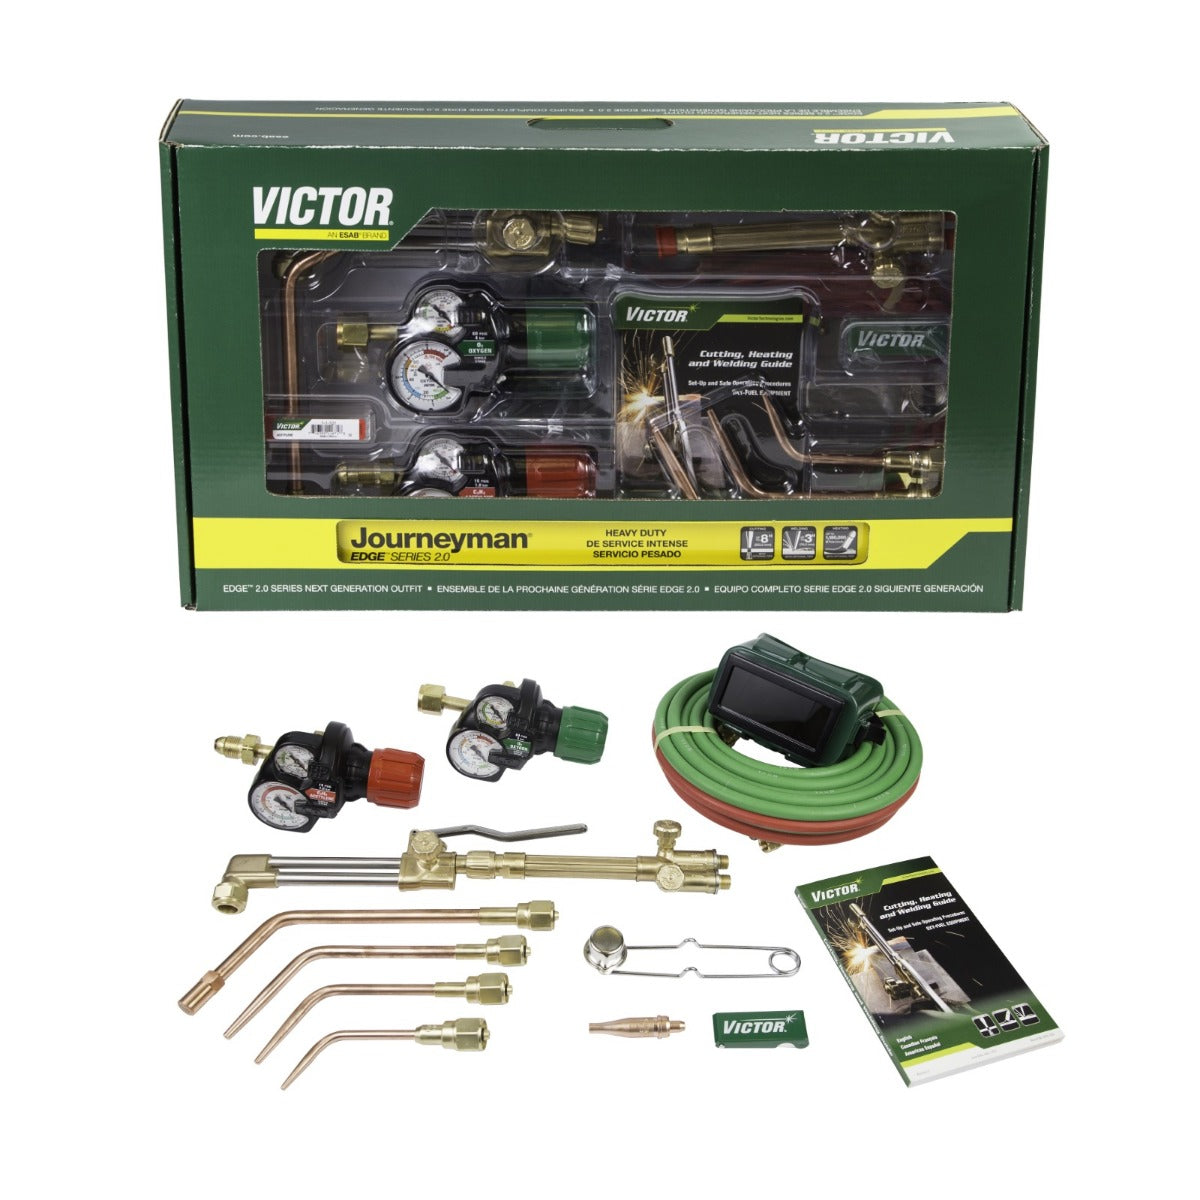 Victor Journeyman Welding and Cutting Outfit (0384-2100)